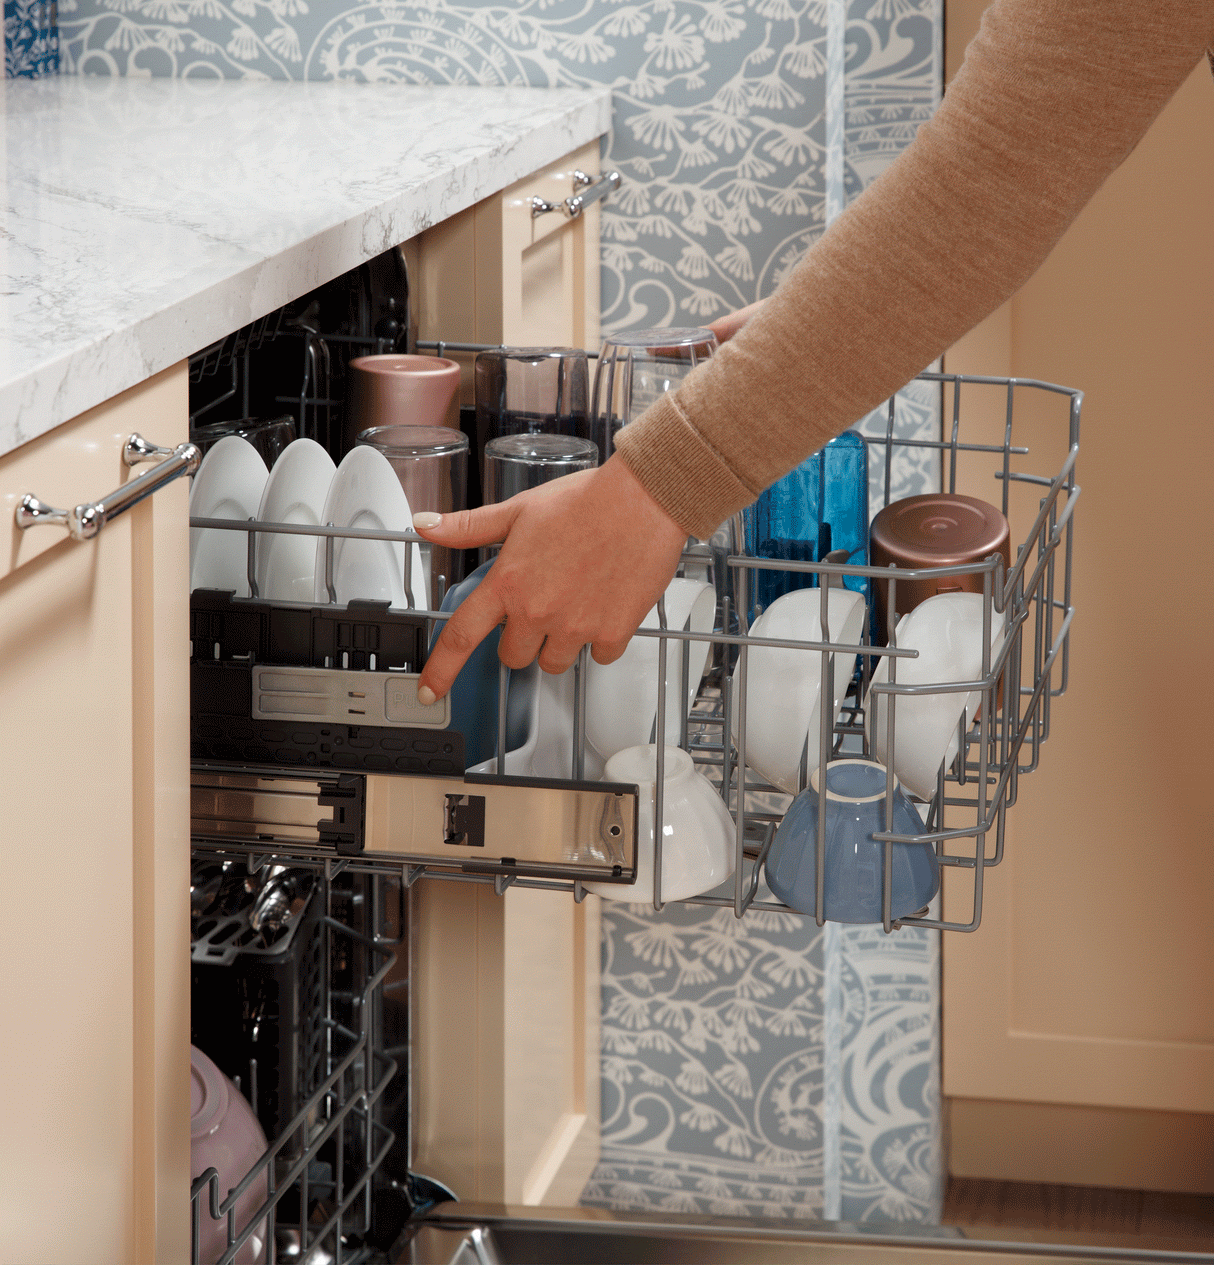 GE(R) ENERGY STAR(R) Top Control with Stainless Steel Interior Dishwasher with Sanitize Cycle - (GDP670SGVWW)